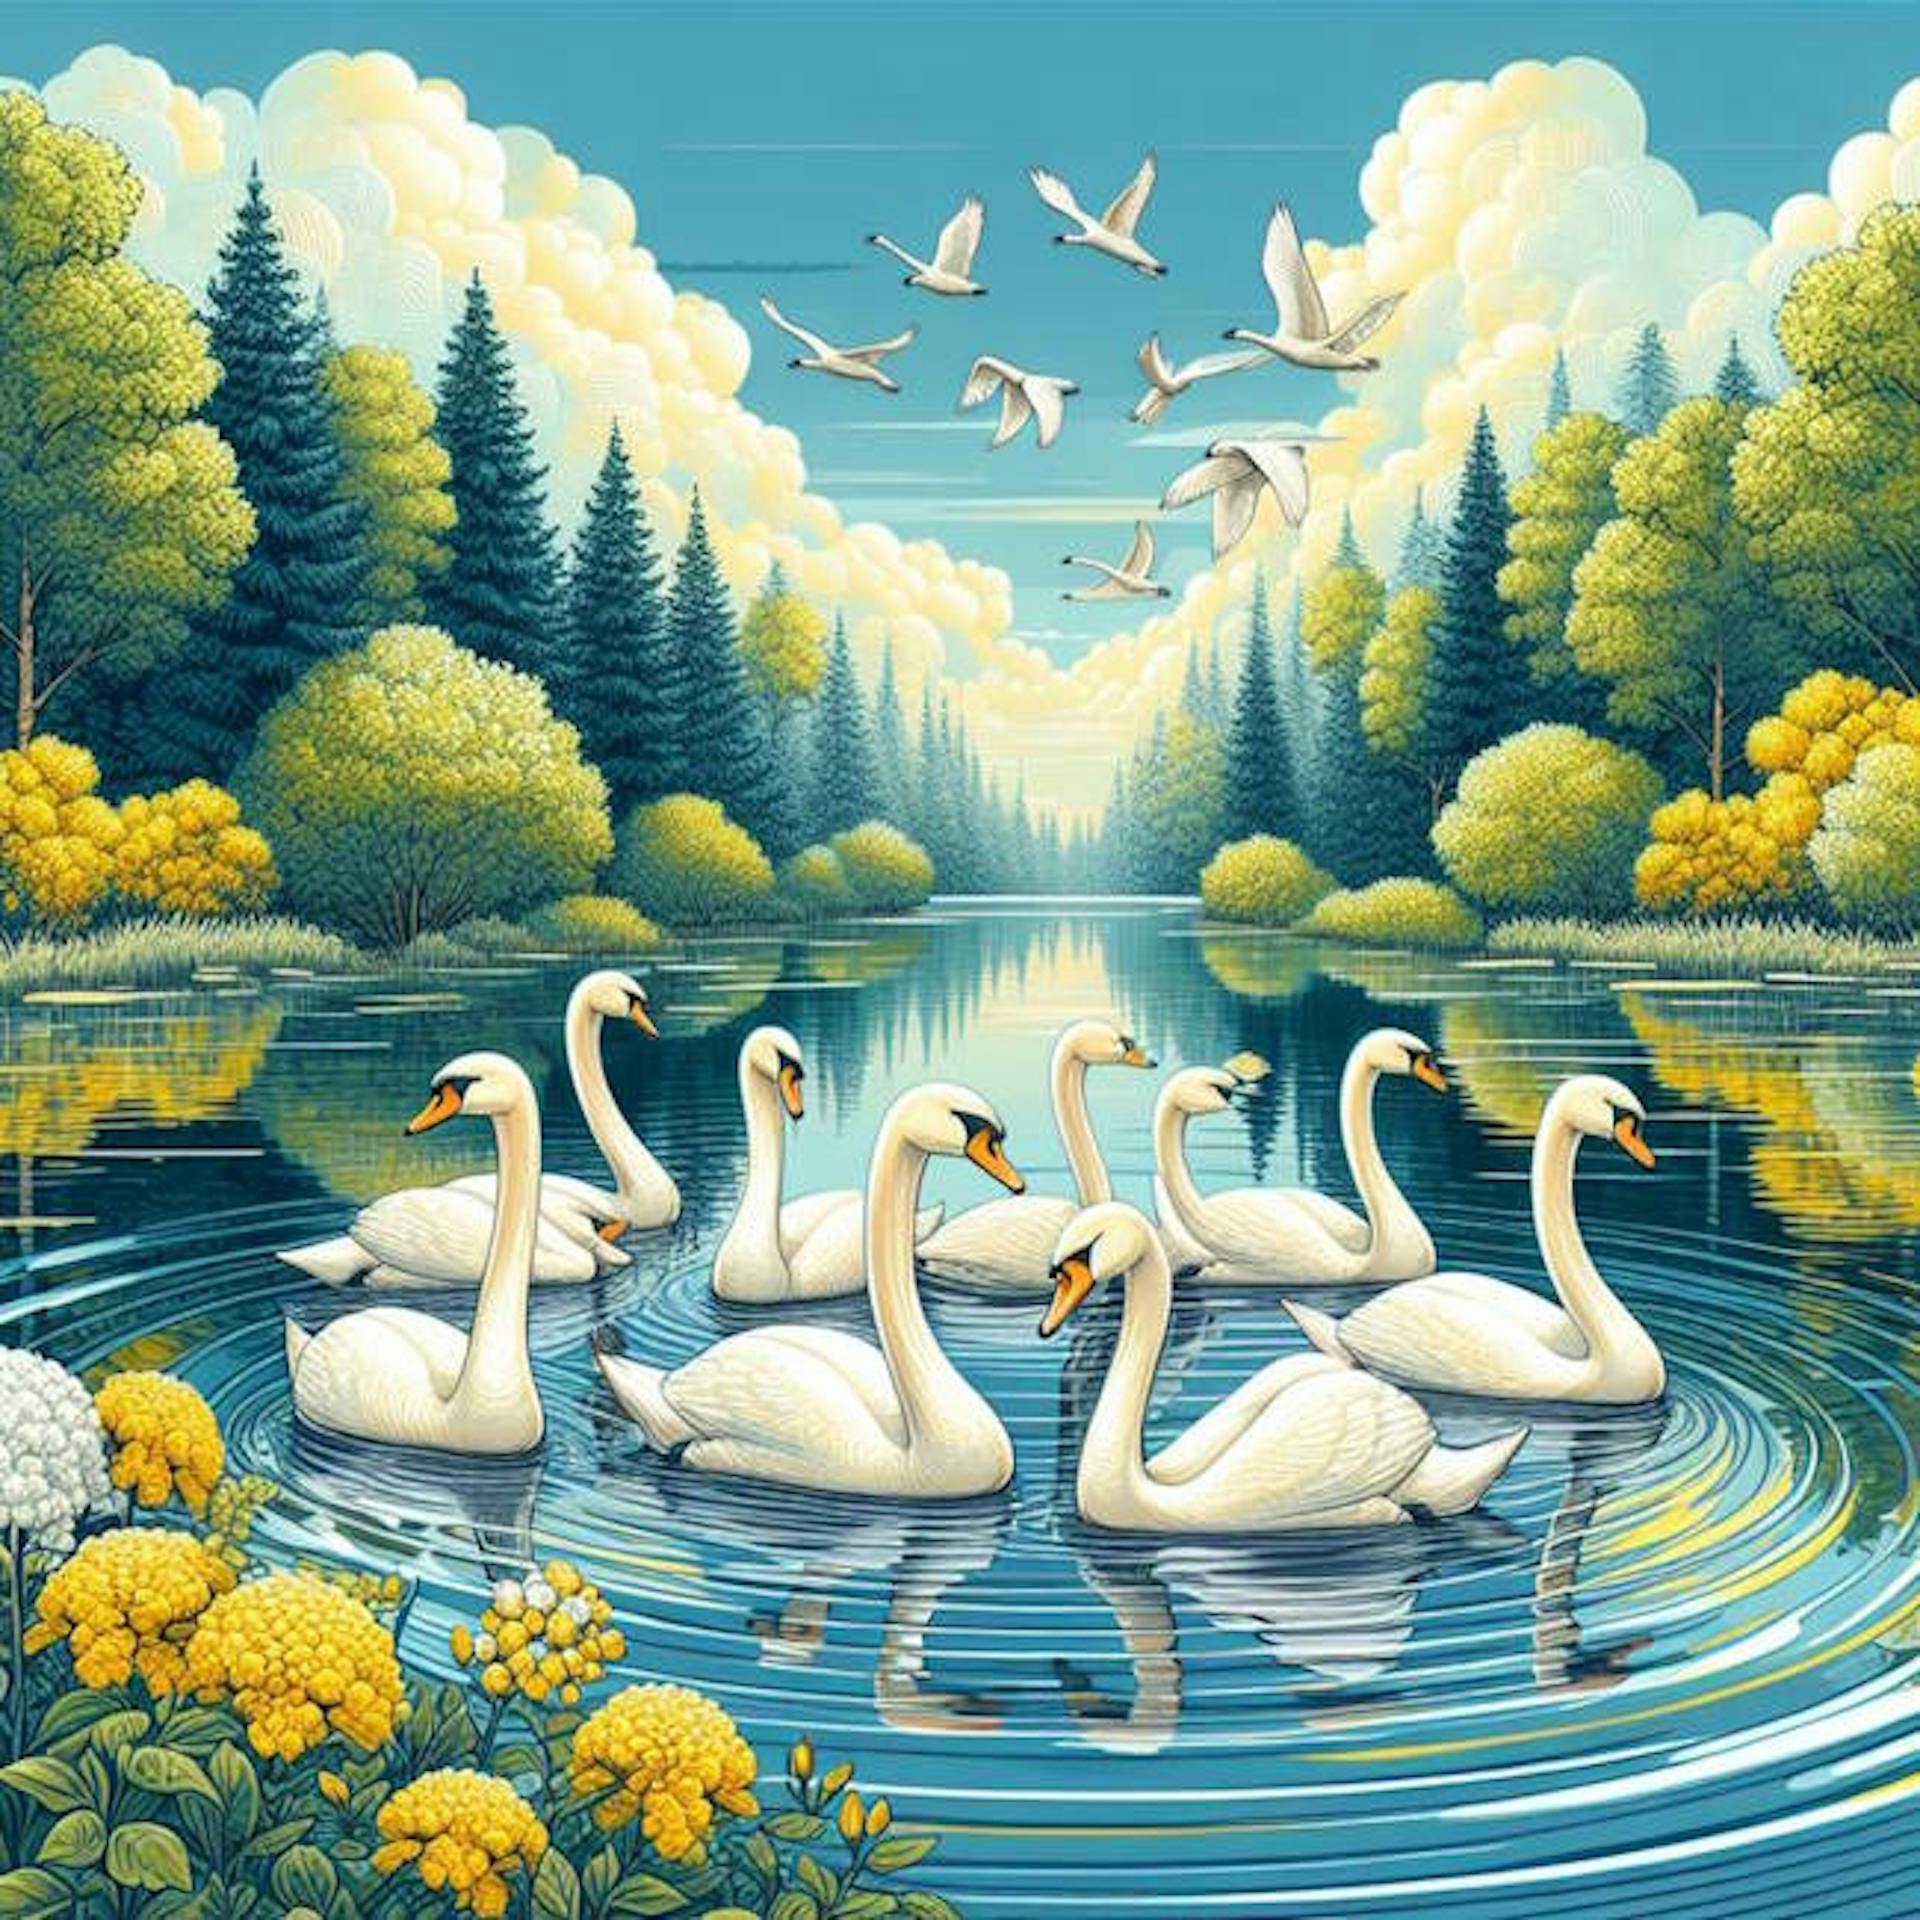 seven swans a-swimming